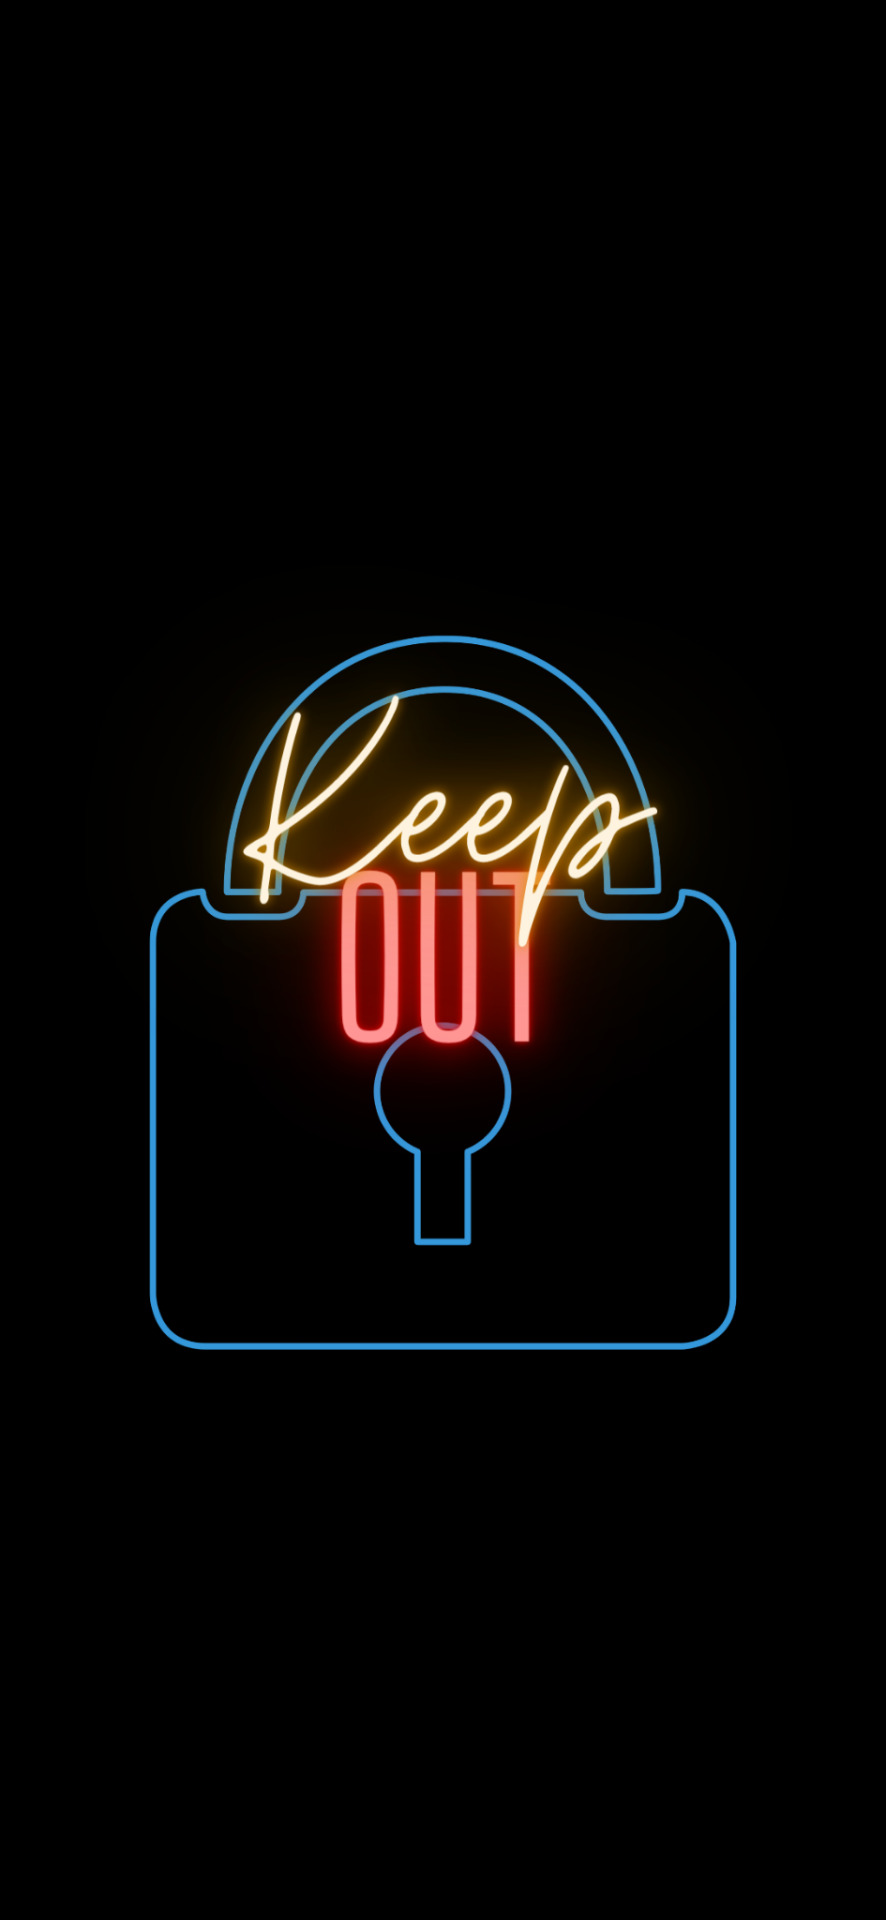 Keep Out Wallpapers